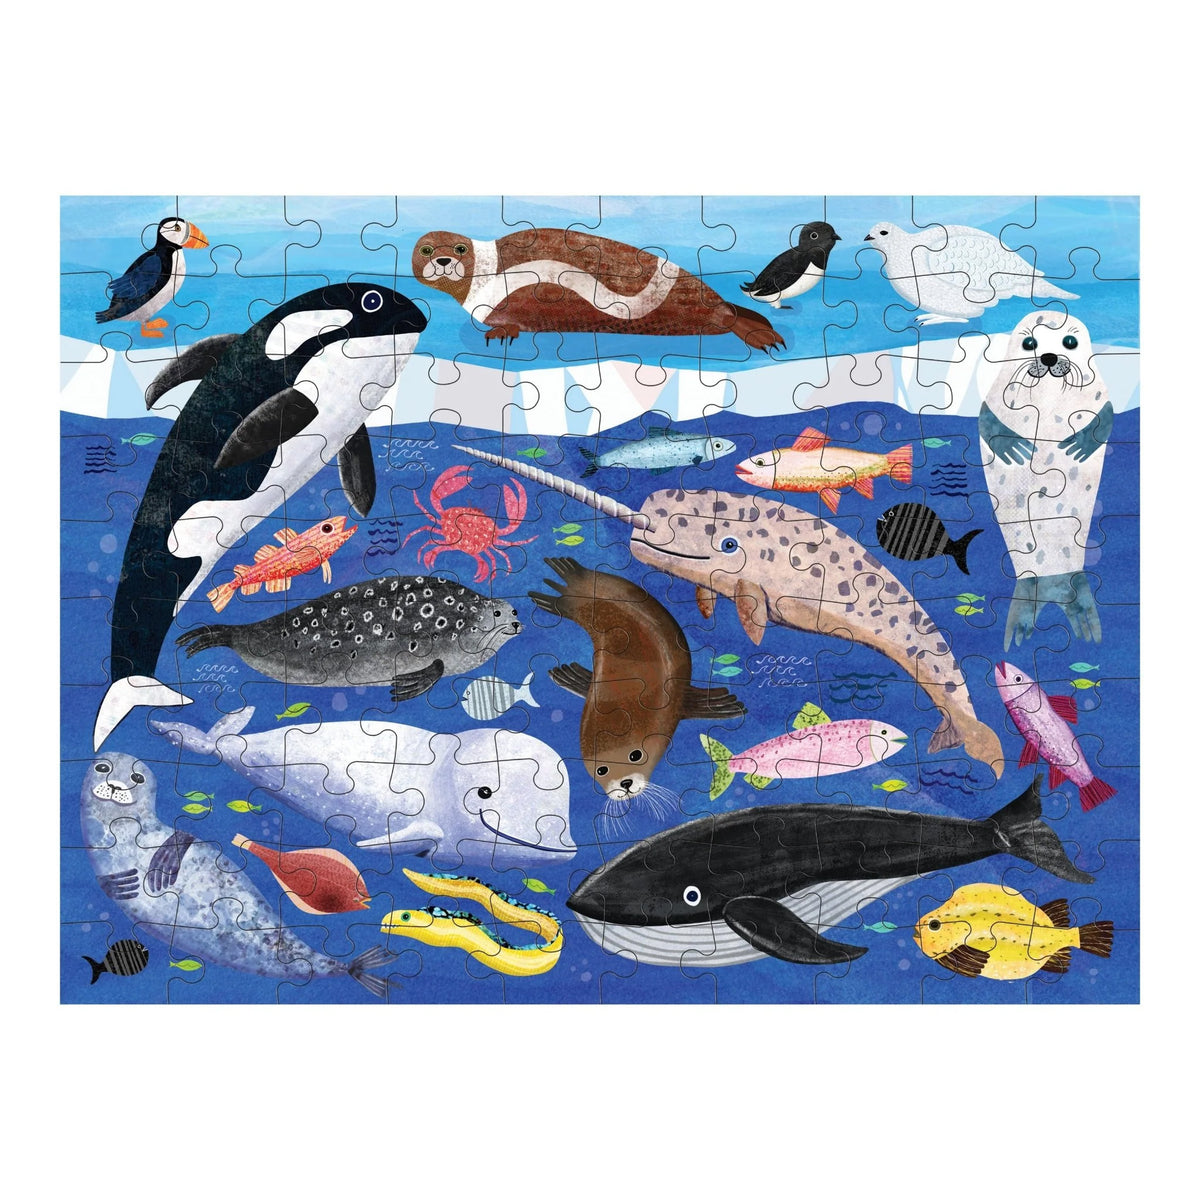 Mudpuppy 100 Piece Double-Sided Puzzle - Arctic Above & Below